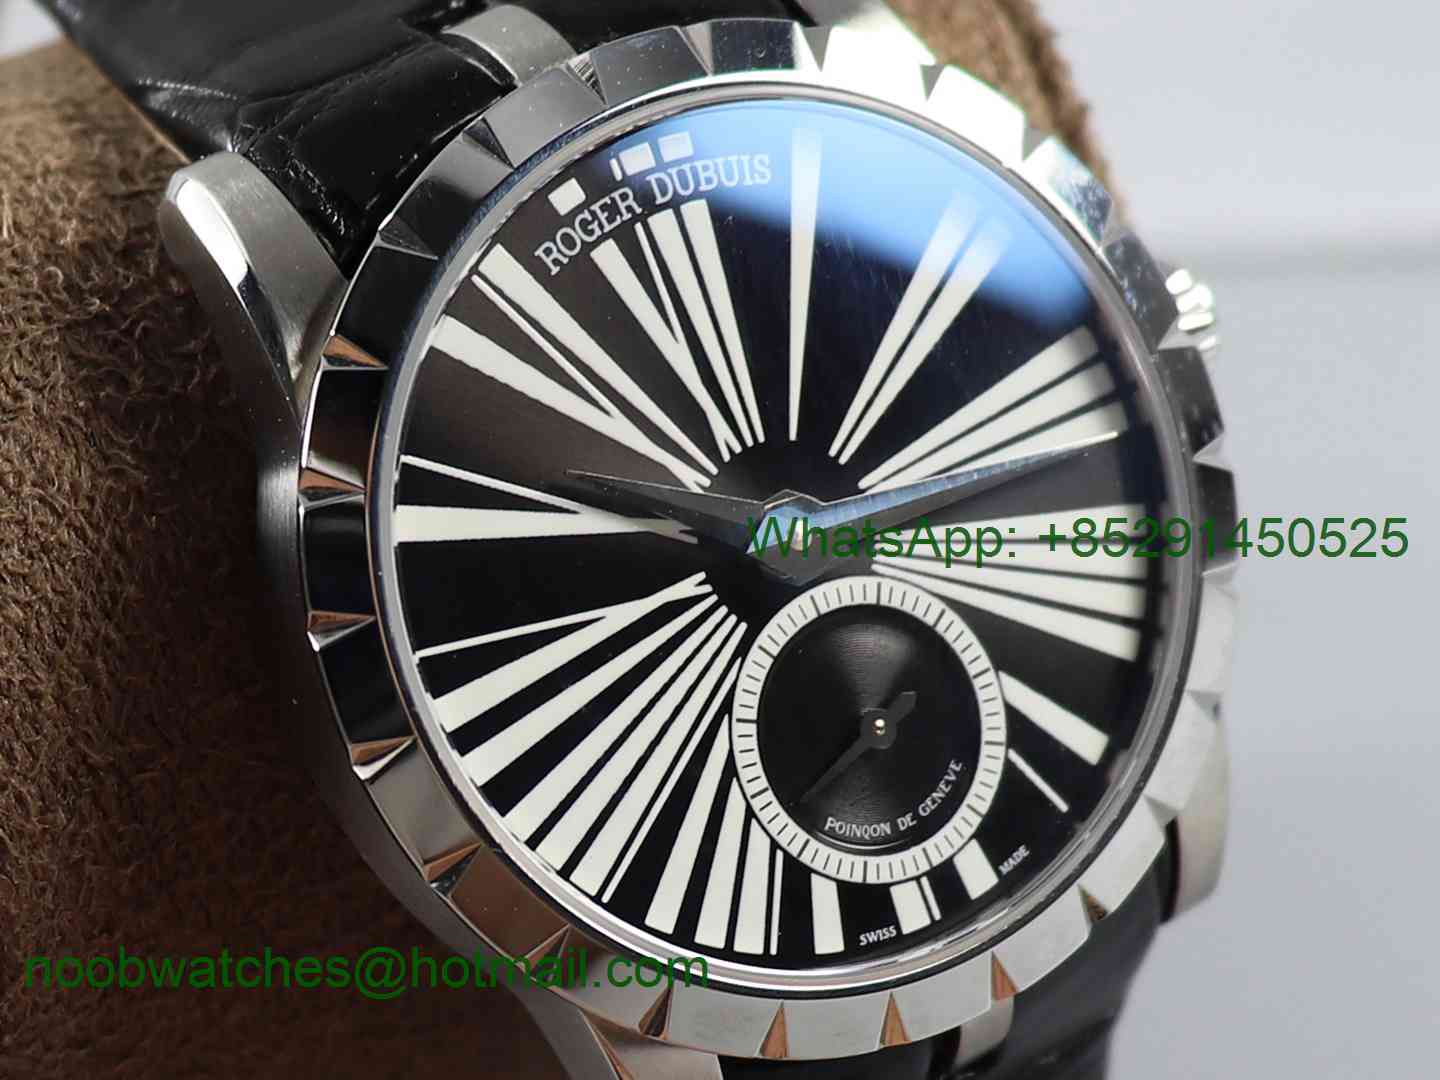 Replica Roger Dubuis Excalibur 42mm Dbex0535 SS PF 1:1 Best Edition Black Dial on Black Leather Strap A830